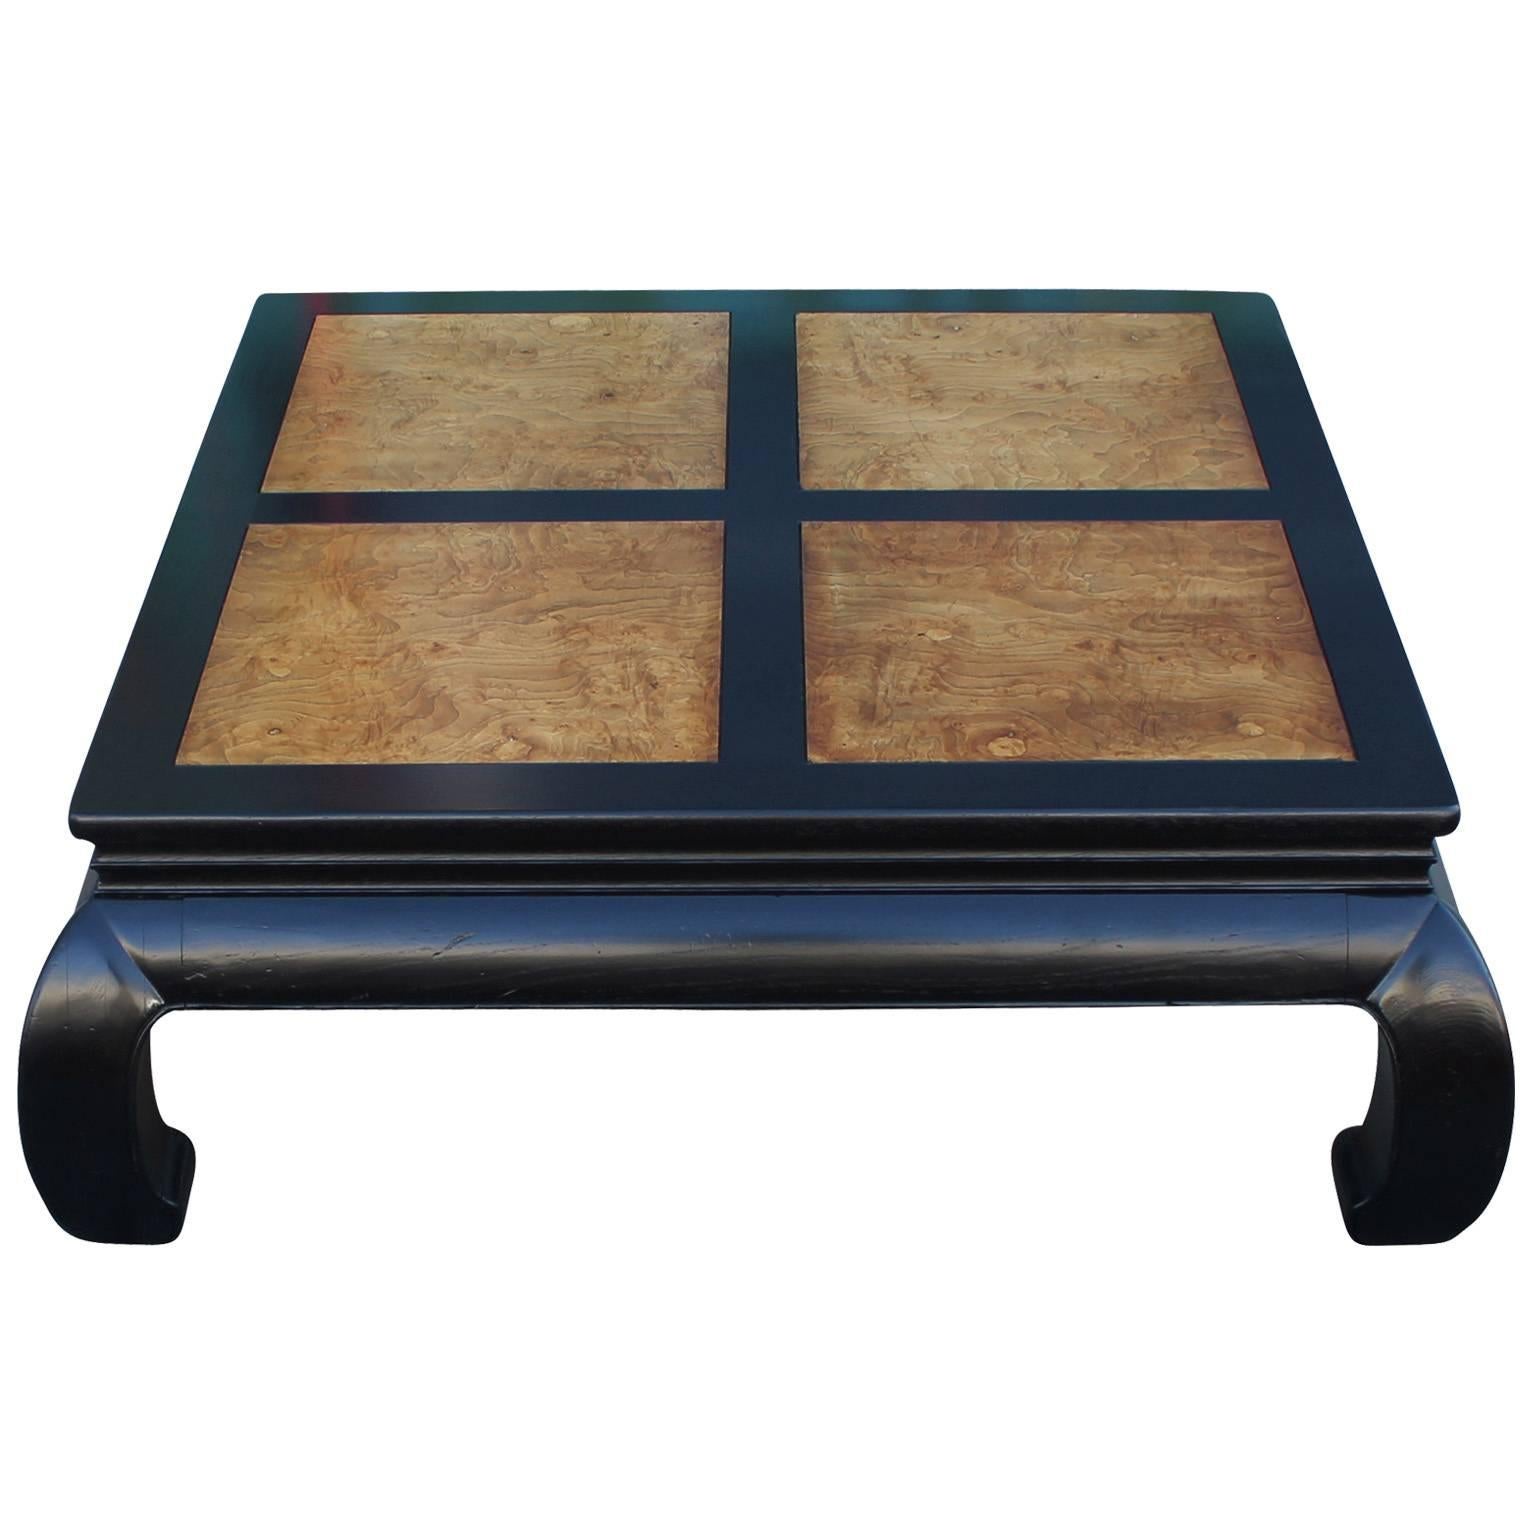 Excellent Ming style square coffee table by Henredon. Coffee table is freshly finished in a two-tone ebony and natural burl wood. Large square coffee table has thick, curvy Chinese inspired legs. Fabulous in a Hollywood Regency style interior.